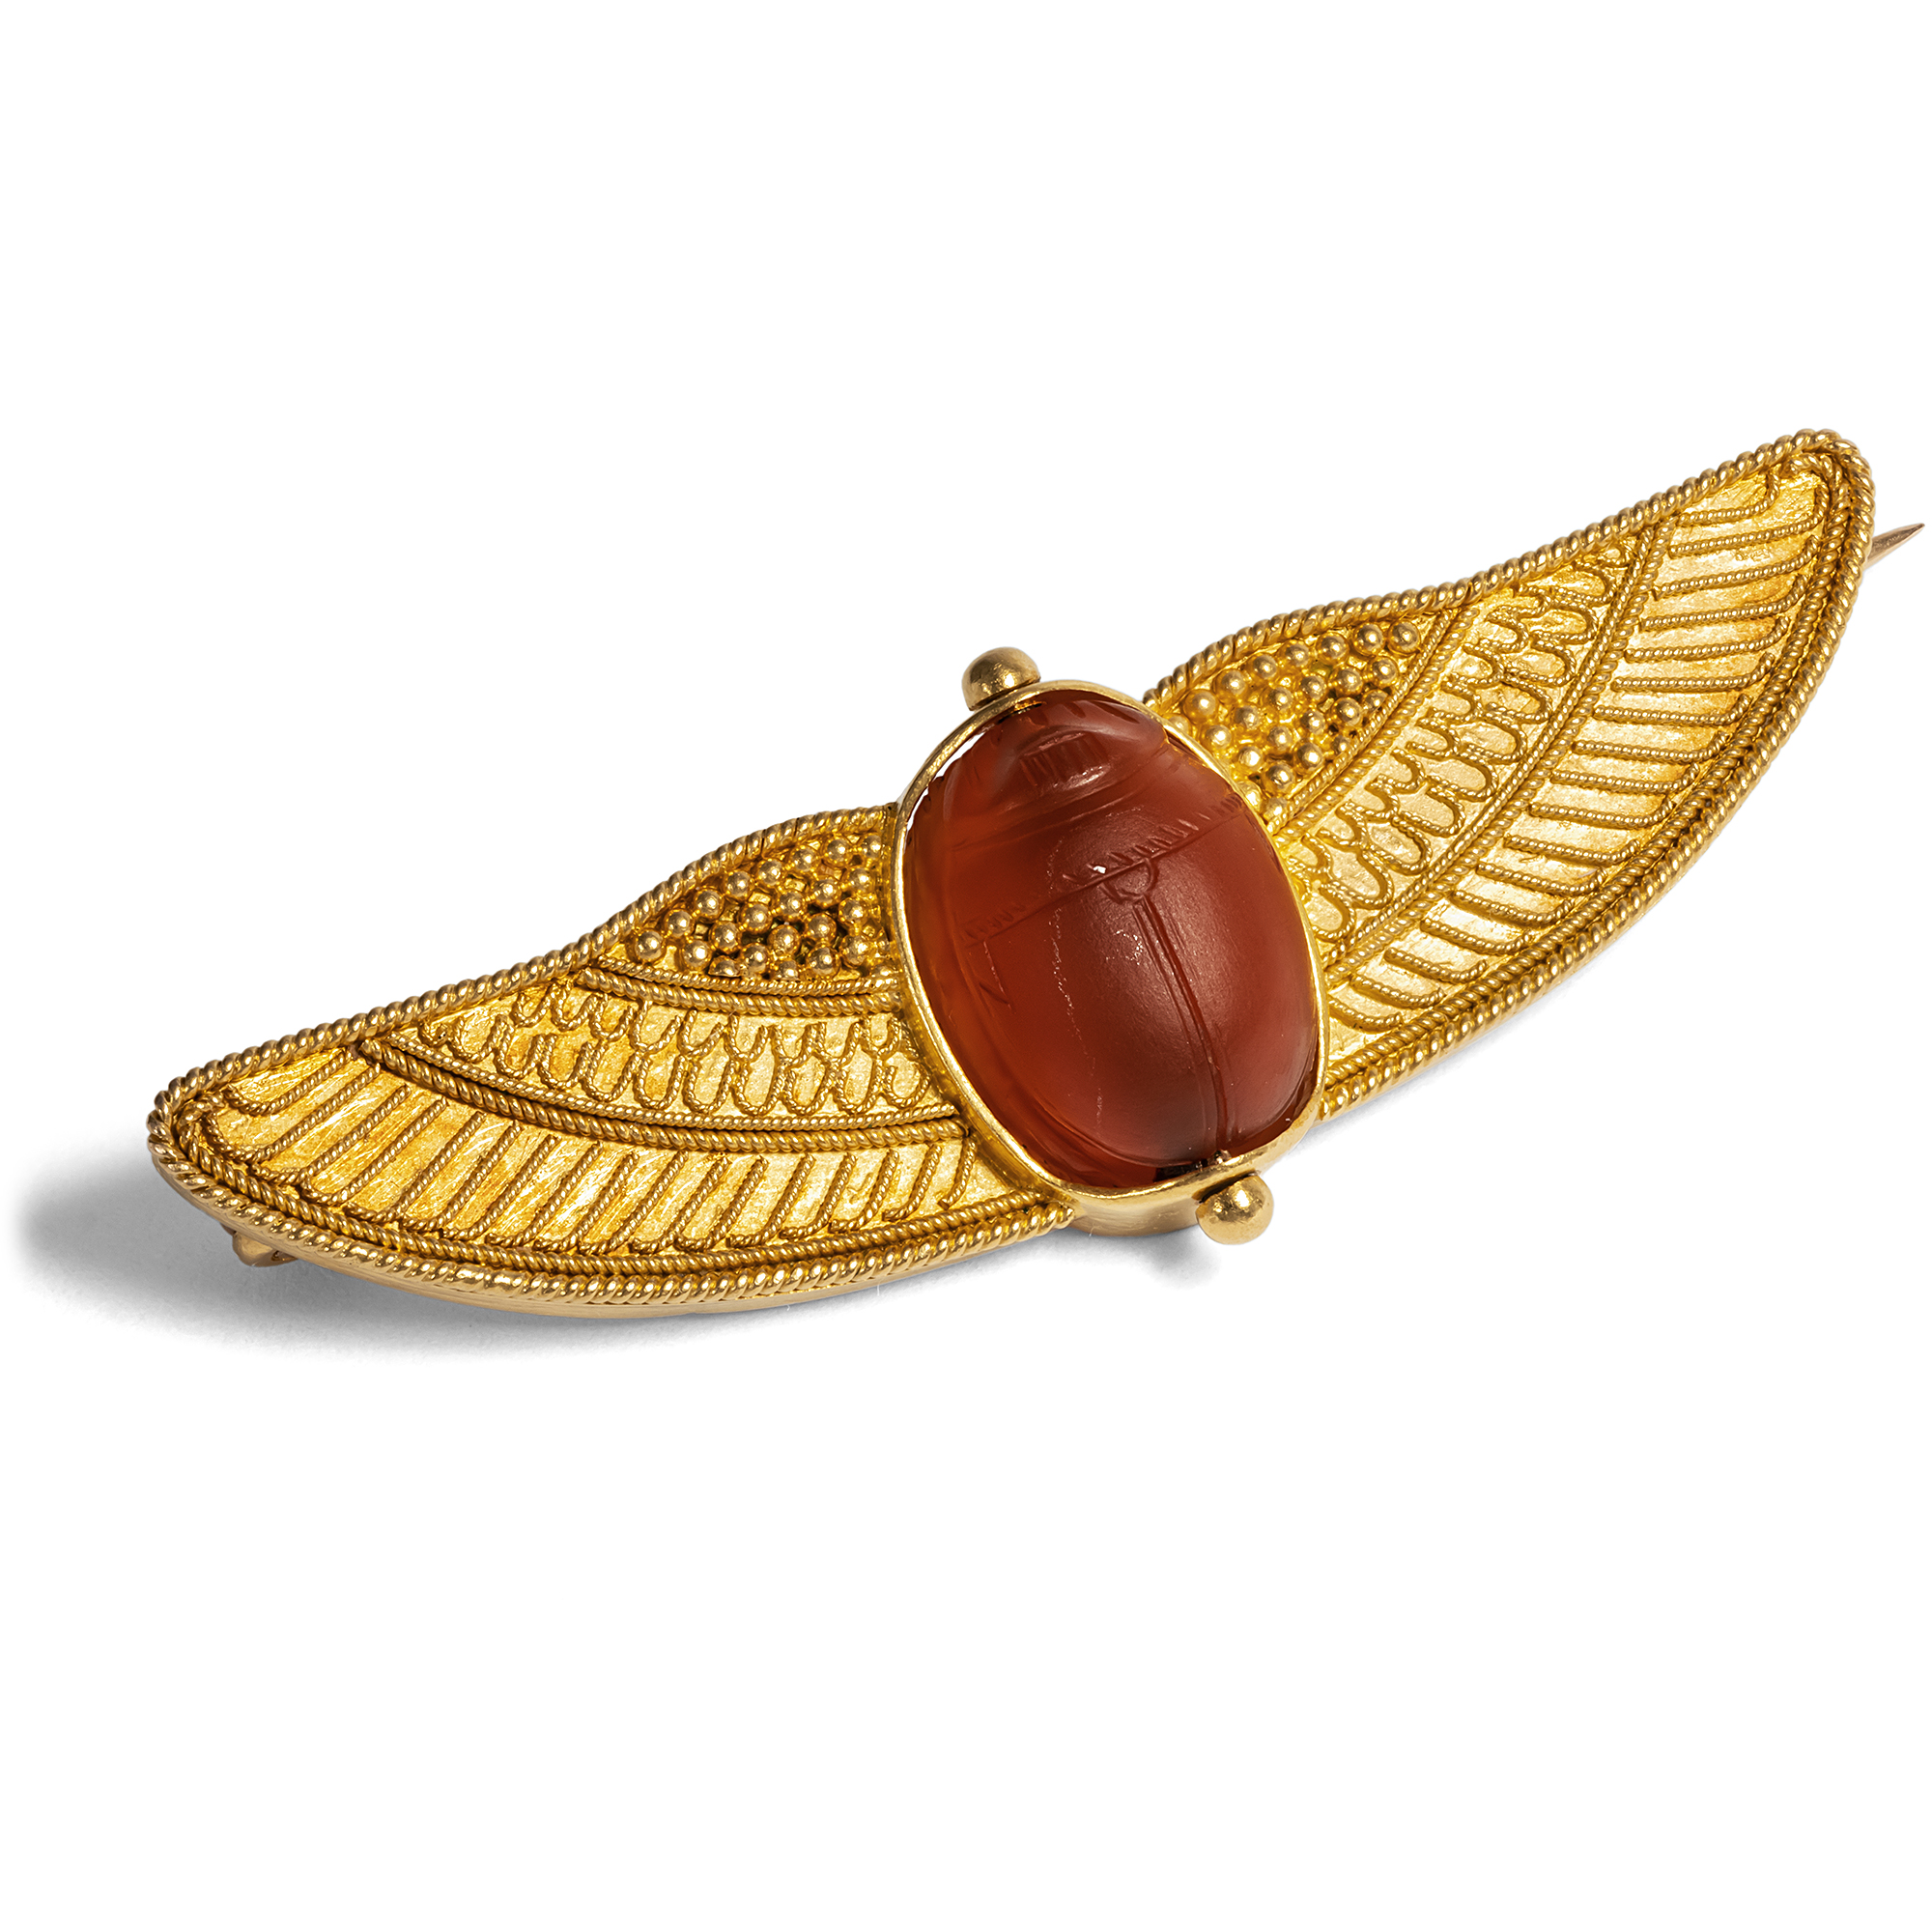 High Quality Brooch in Archaeological Style with Scarab in Gold, c. 1875